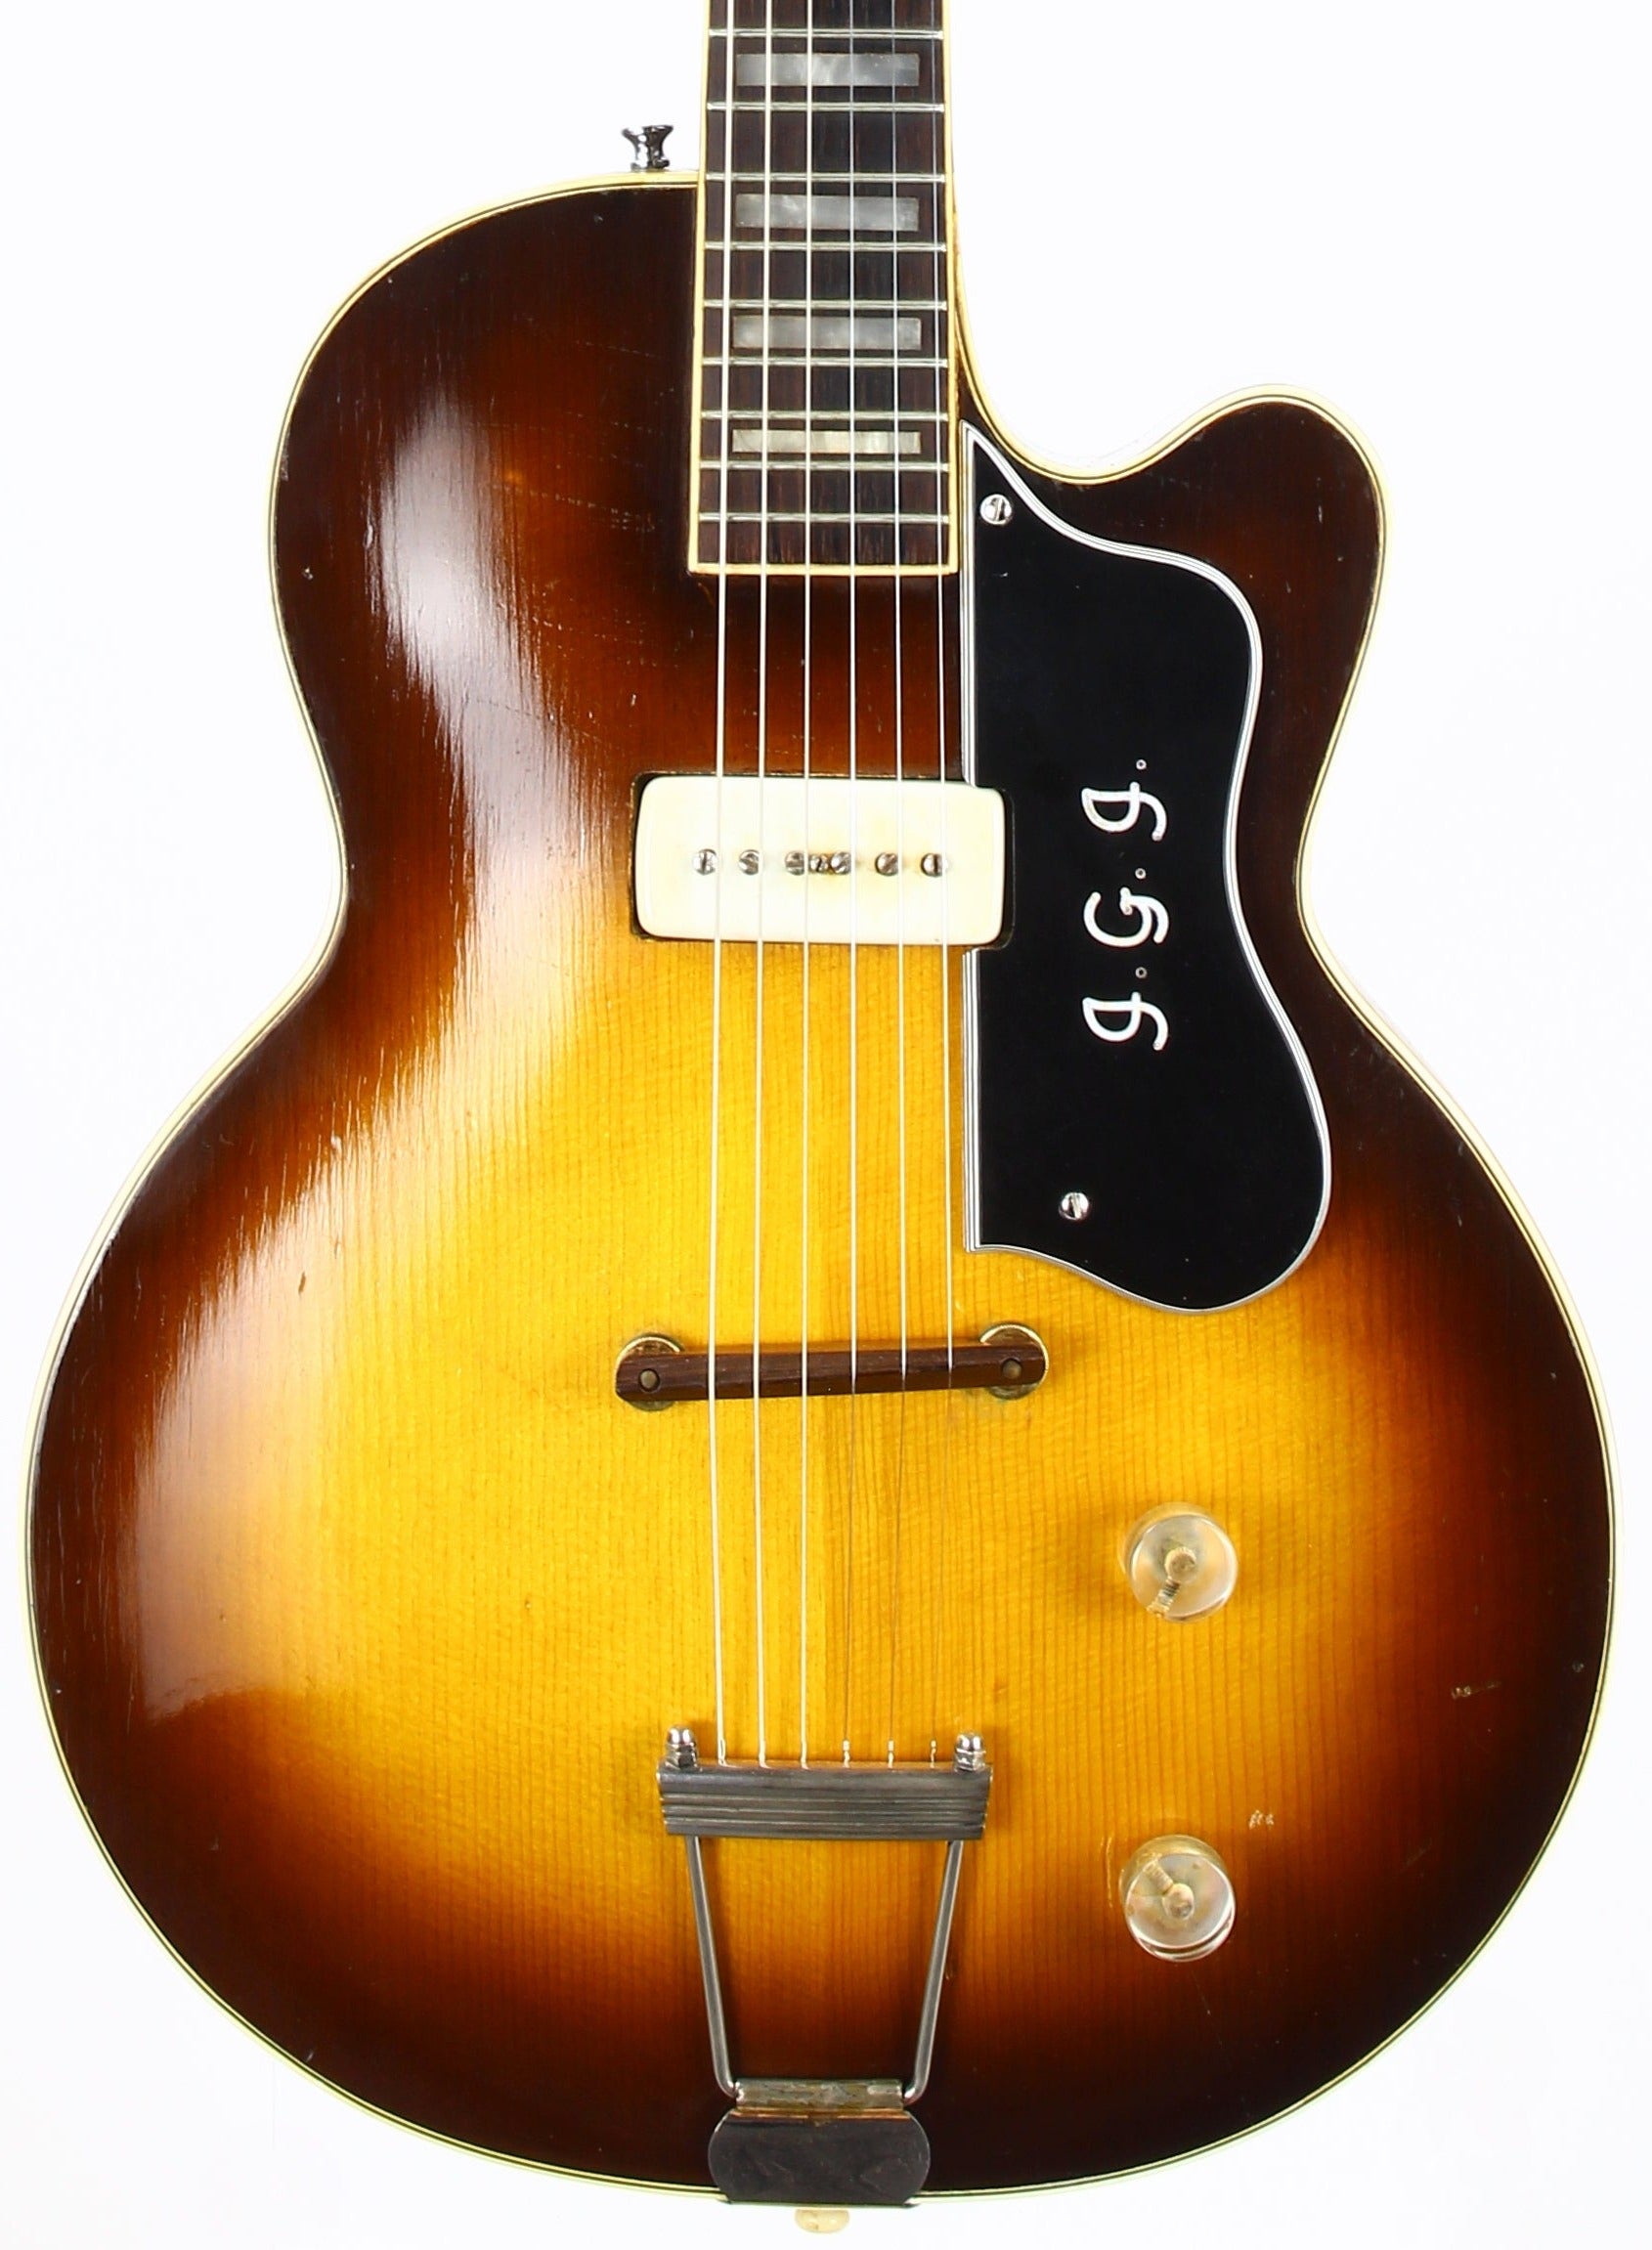 *SOLD*  EXTREMELY RARE! 1956 Guild M-75 Aristocrat Custom Order ONE Single Franz Pickup - 1950's Les Paul Competitor!